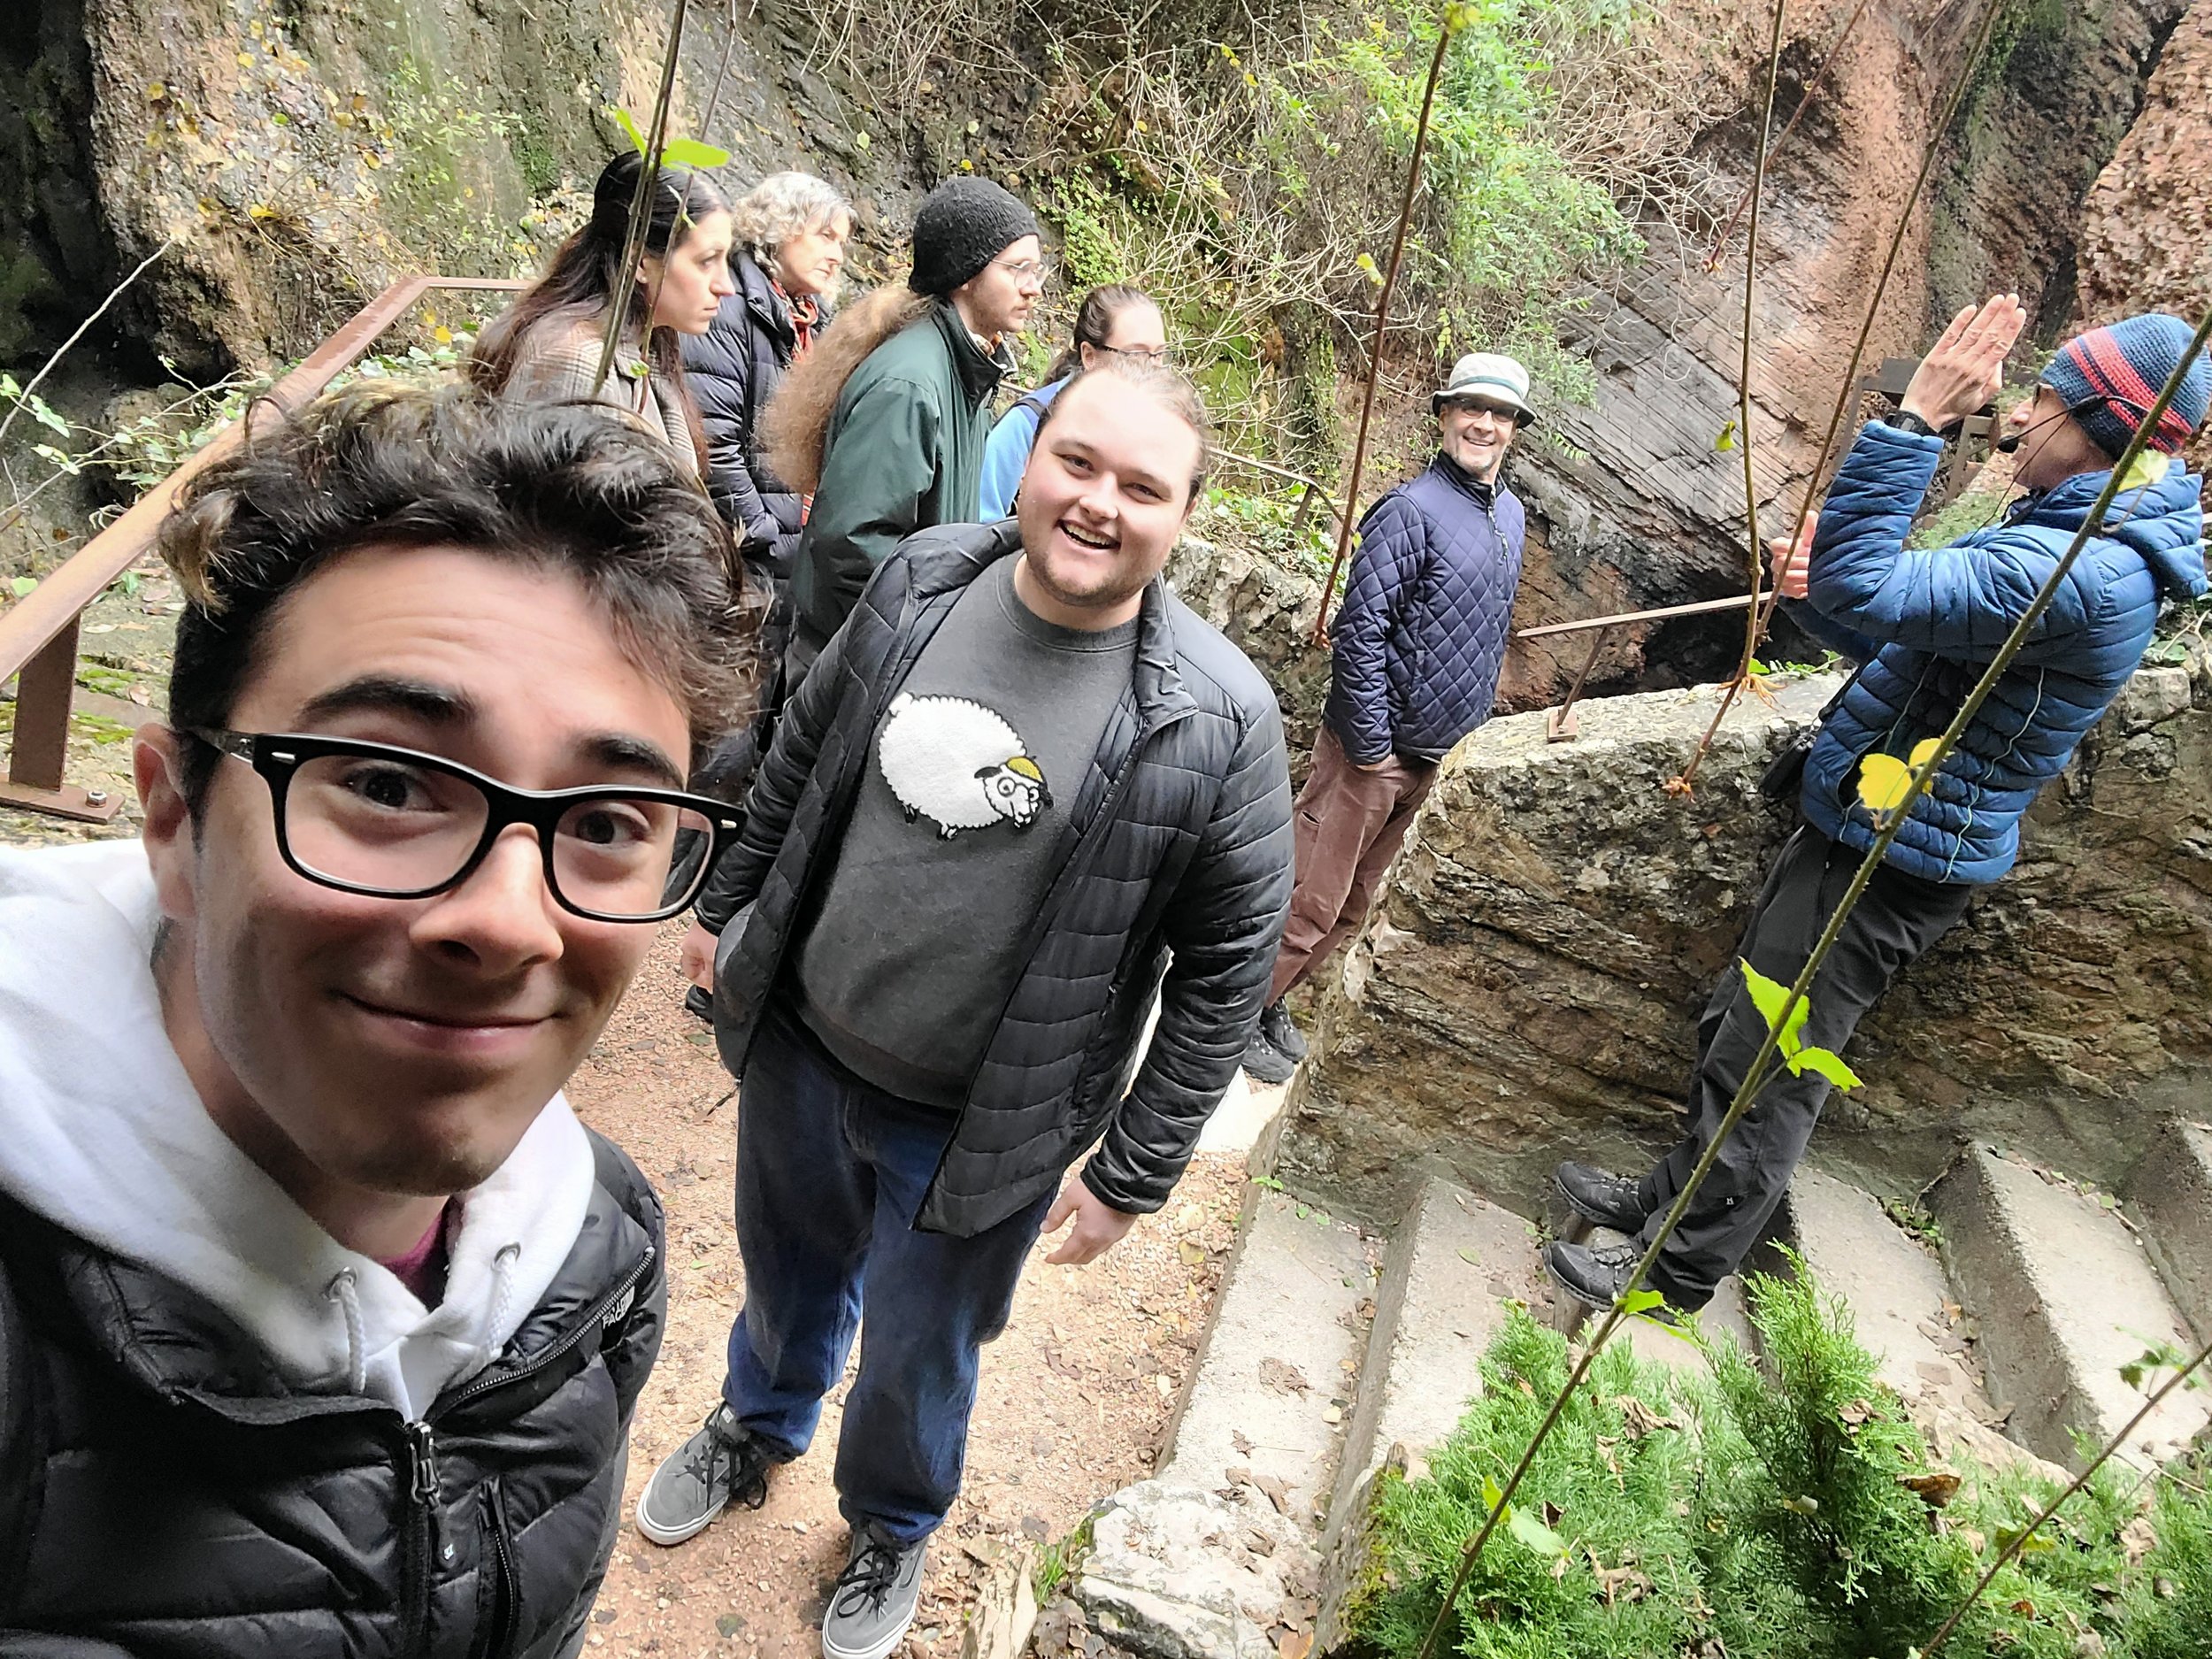   The group taking a hike in Trento  